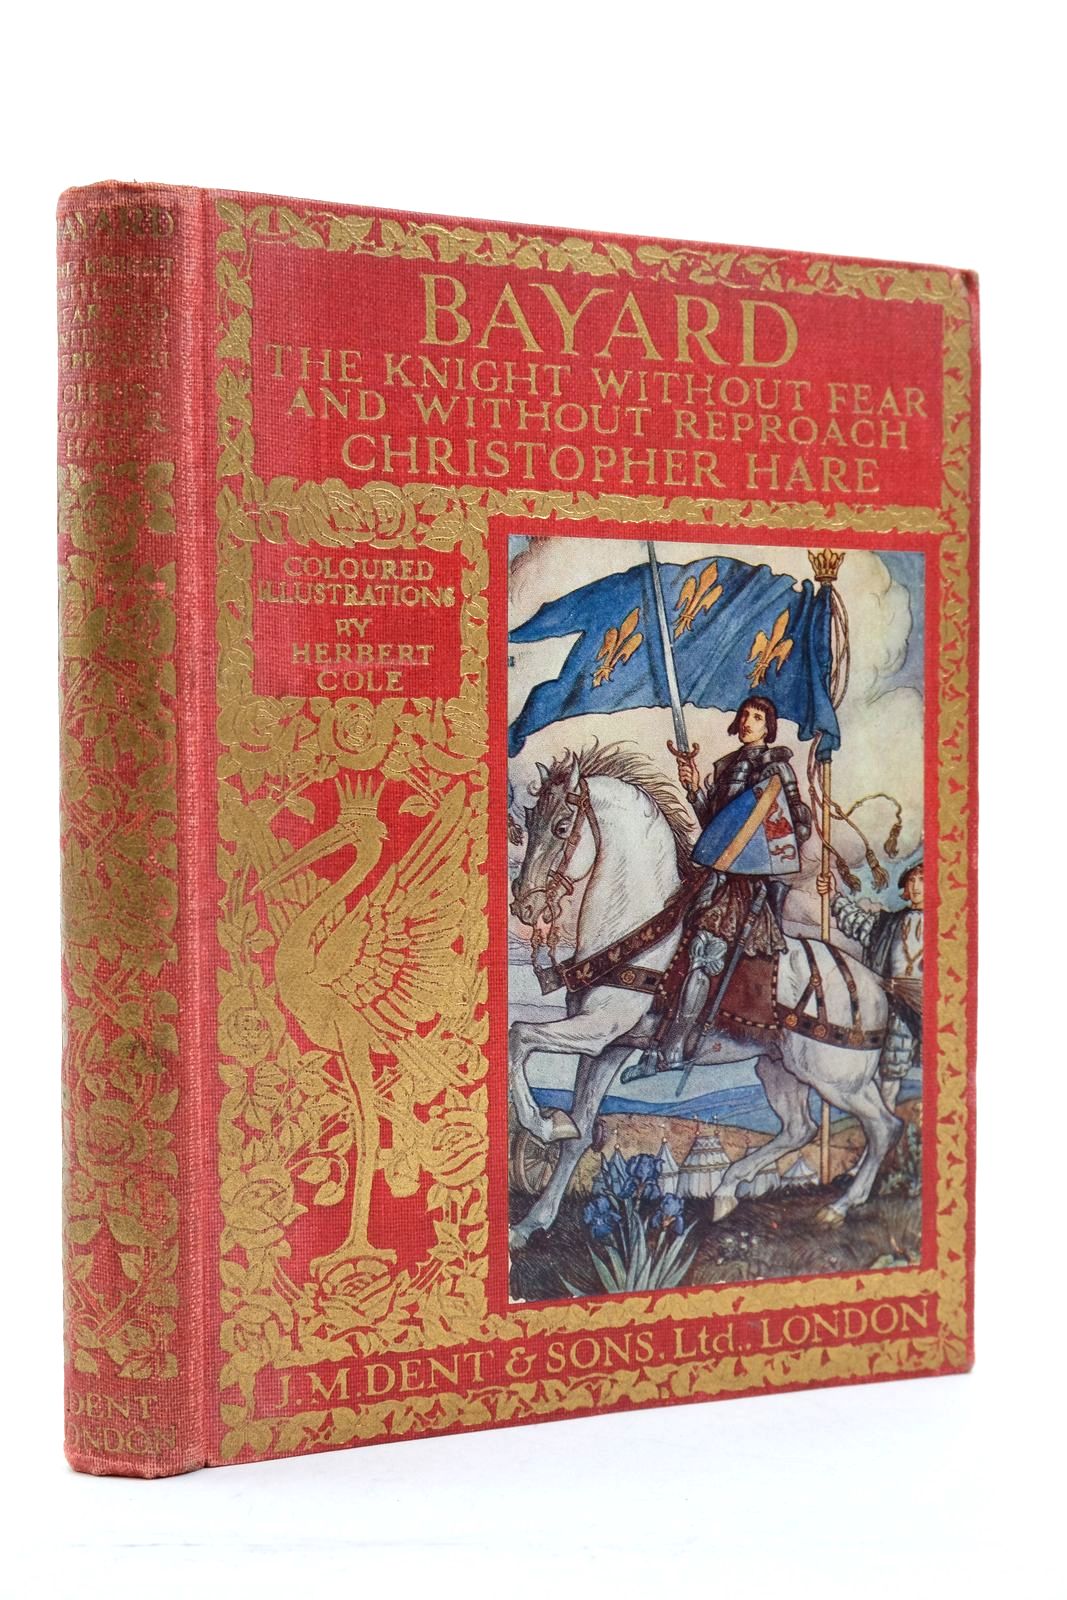 Photo of BAYARD written by Hare, Christopher illustrated by Cole, Herbert published by J.M. Dent &amp; Sons Ltd. (STOCK CODE: 2138967)  for sale by Stella & Rose's Books